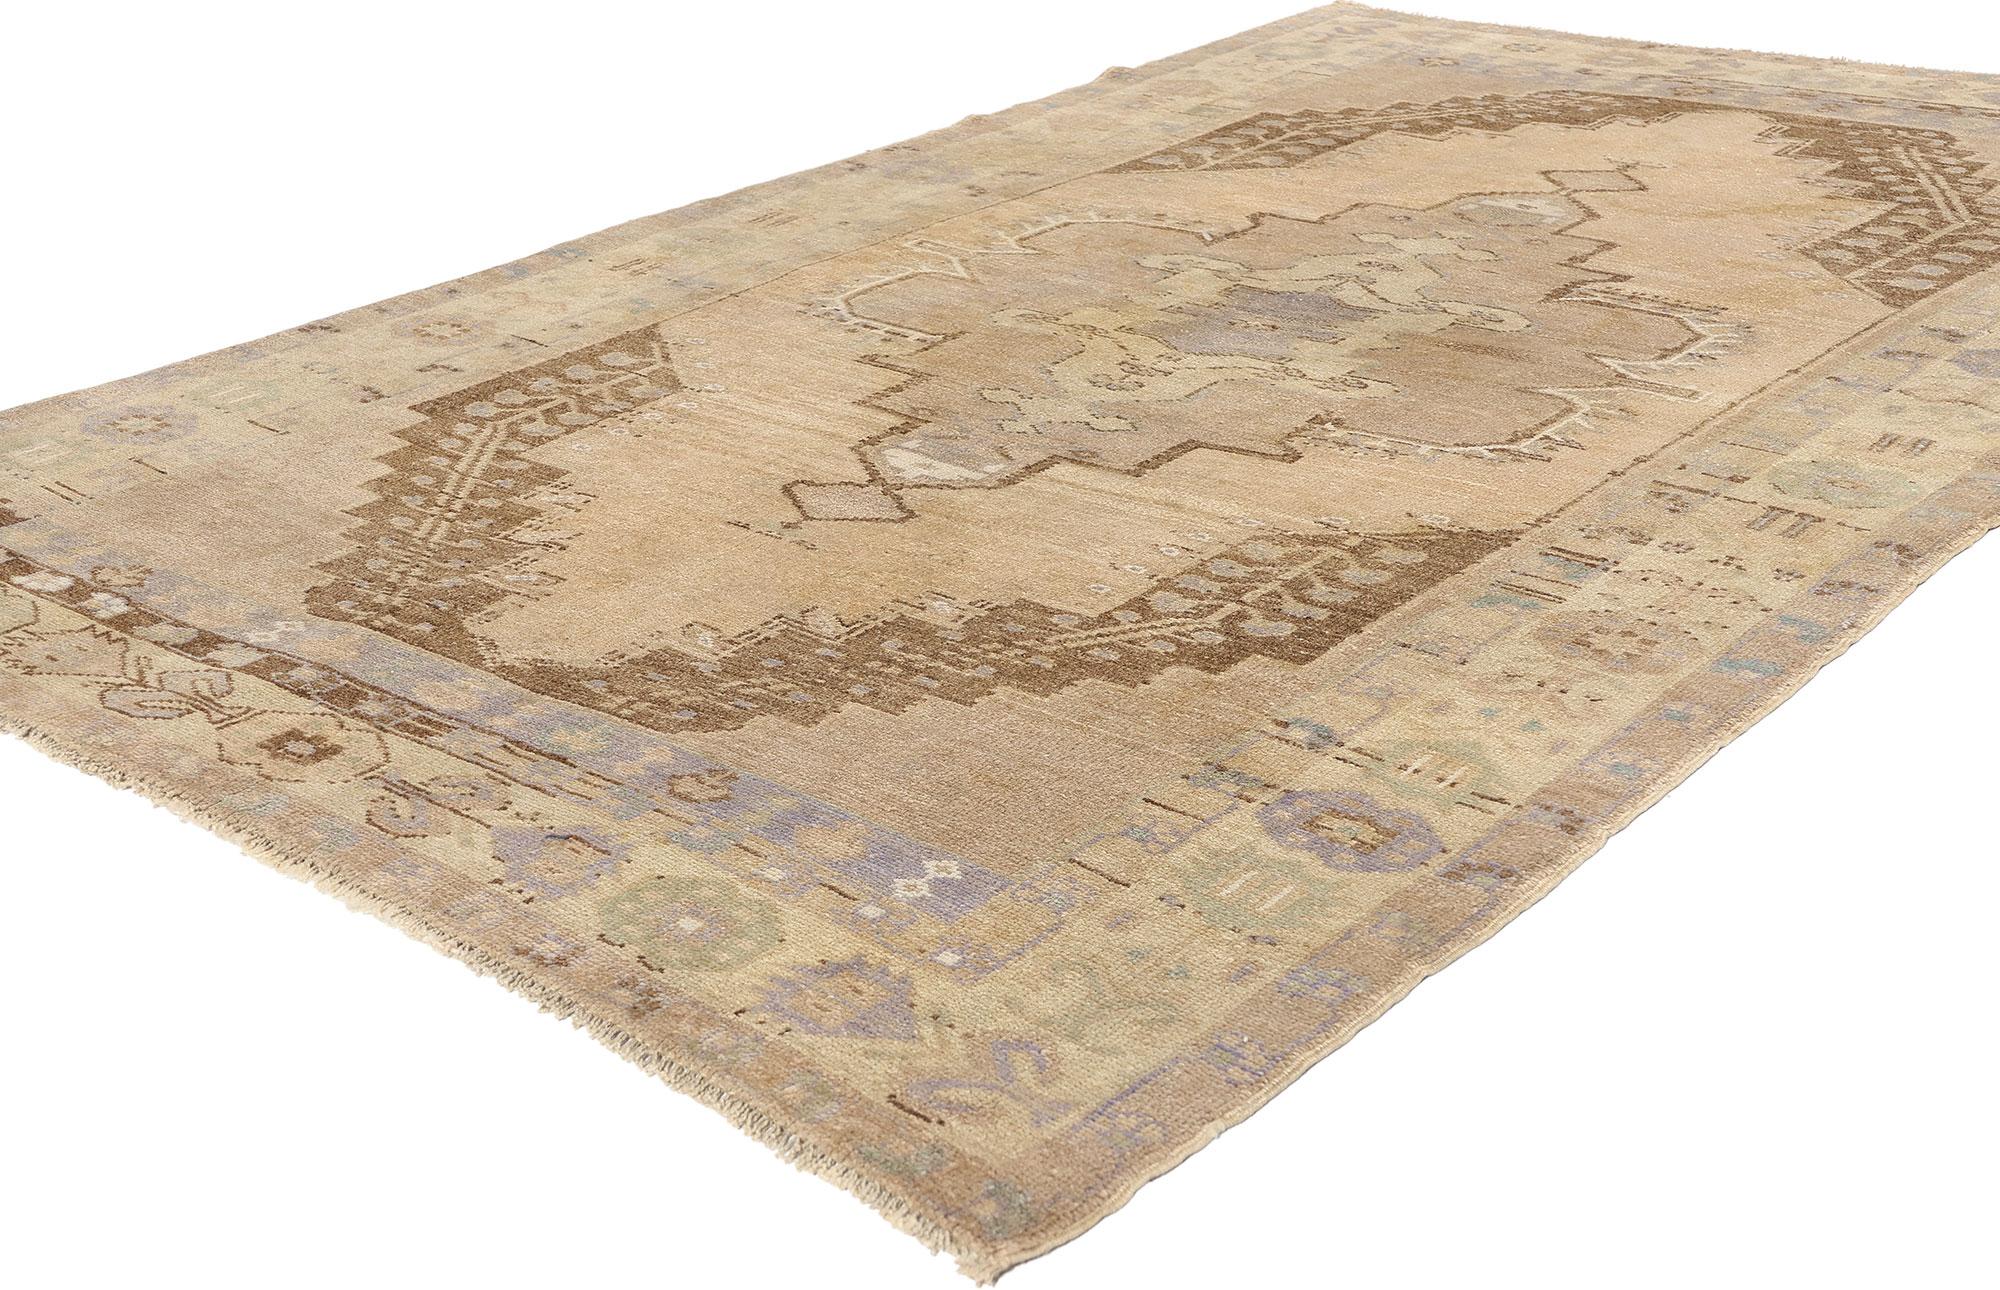 52045 Earth-Tone Vintage Turkish Oushak Rug, 05'00 x 07'11. Immersed in centuries-old tradition and meticulous artisanal craftsmanship, antique-washed Turkish Oushak rugs, originating from the revered Oushak region, undergo a painstaking washing